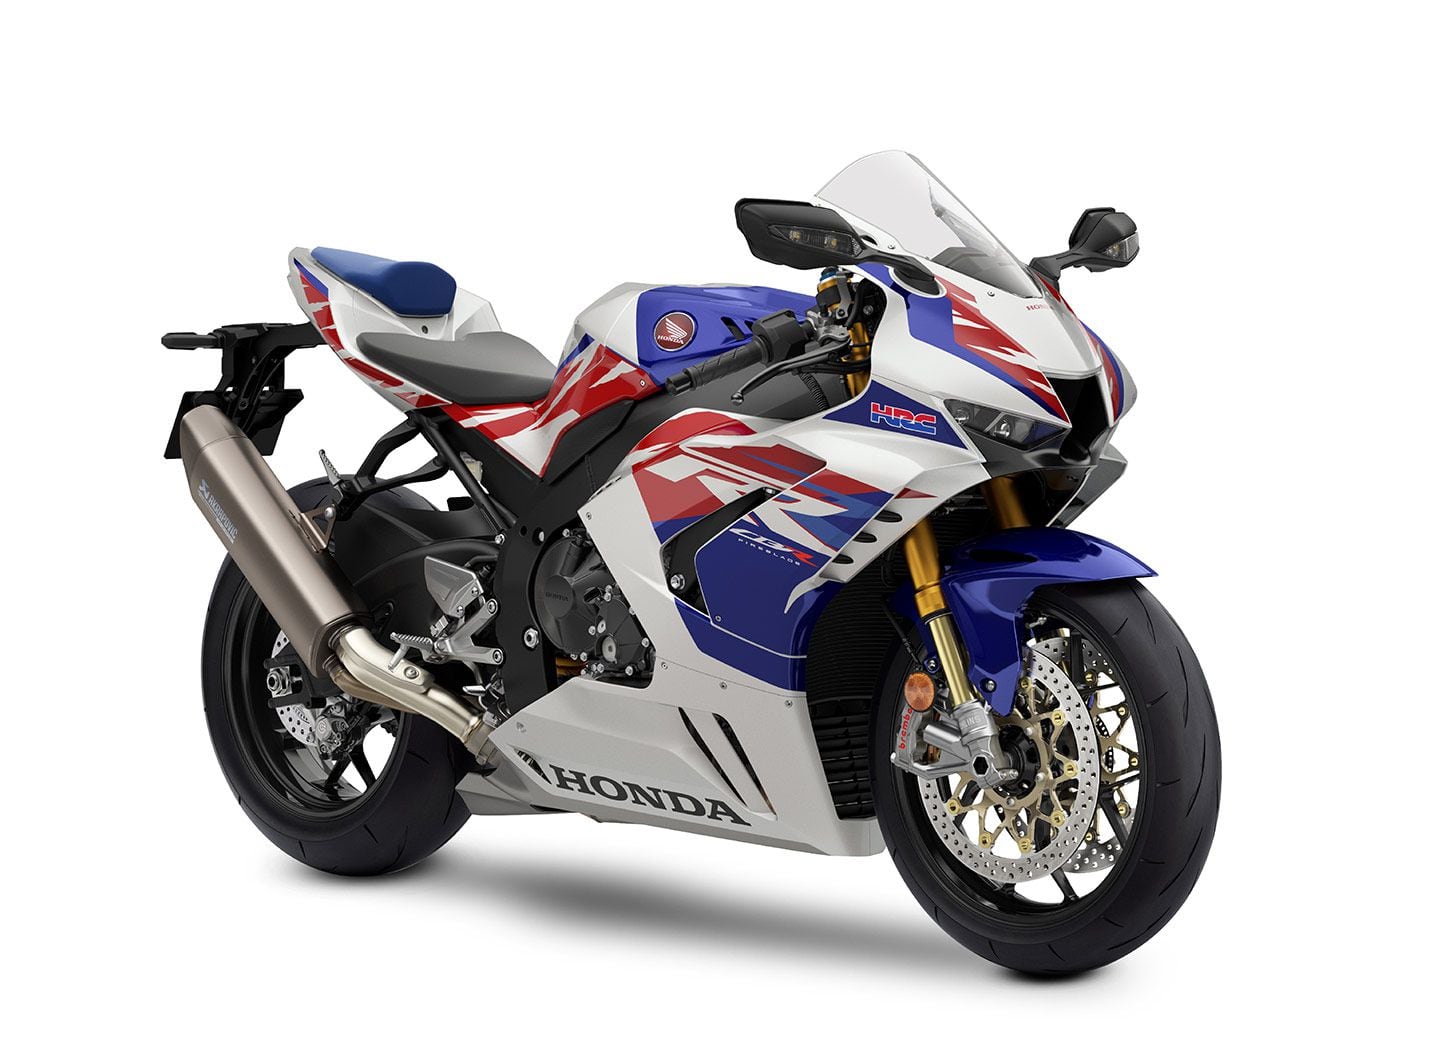 The CBR1000RR-R Fireblade SP’s anniversary livery is about as good as it gets.